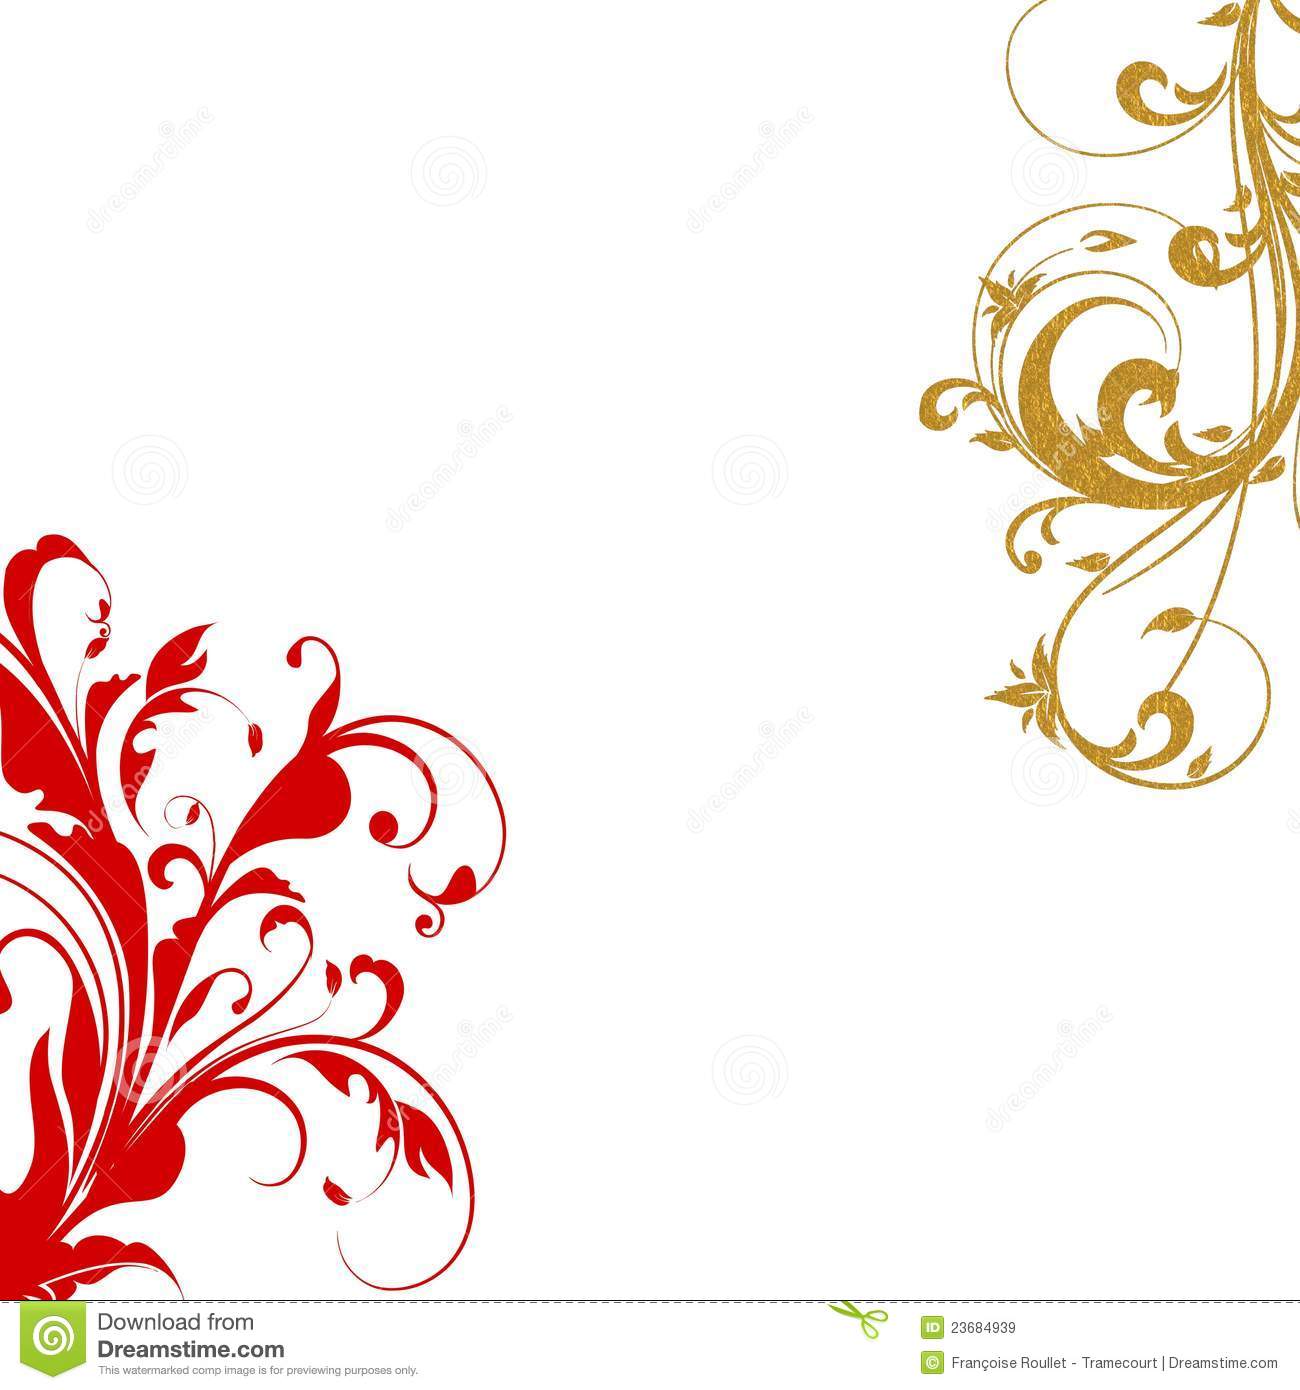 Red and Gold Swirl Border